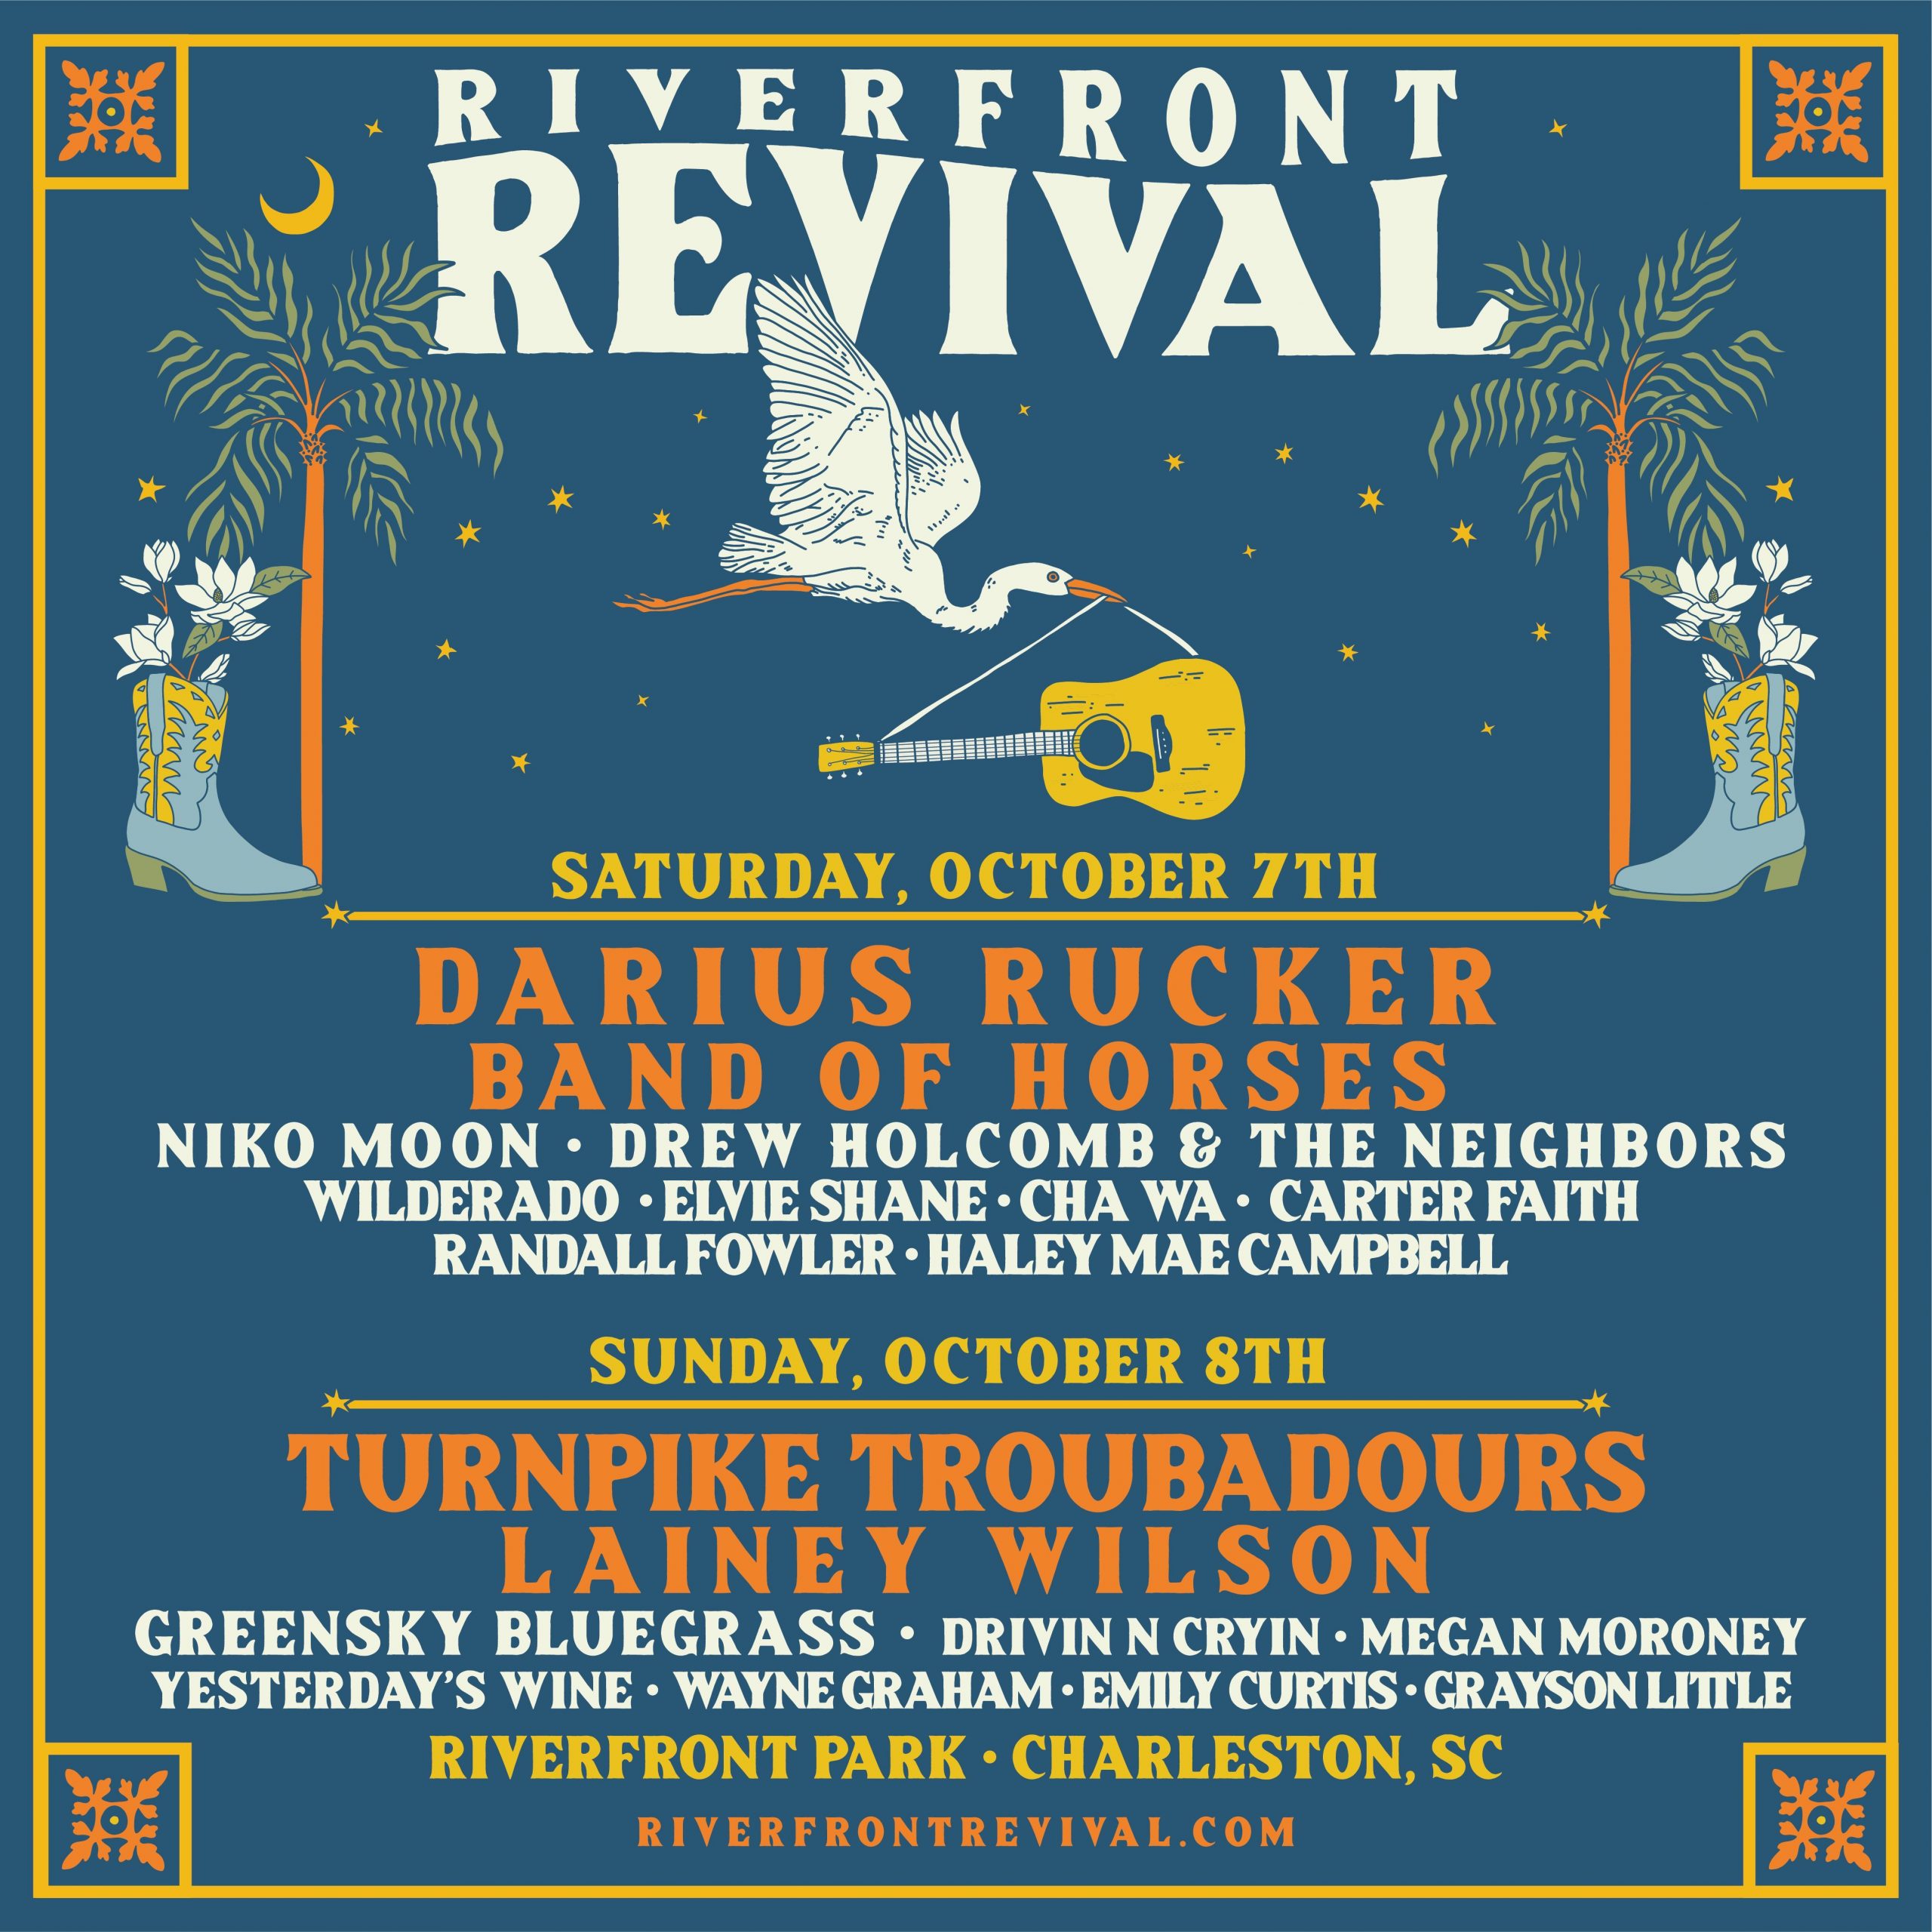 DARIUS RUCKER’S RIVERFRONT REVIVAL MUSIC FESTIVAL ANNOUNCES DAILY LINEUP & SINGLE-DAY TICKETS